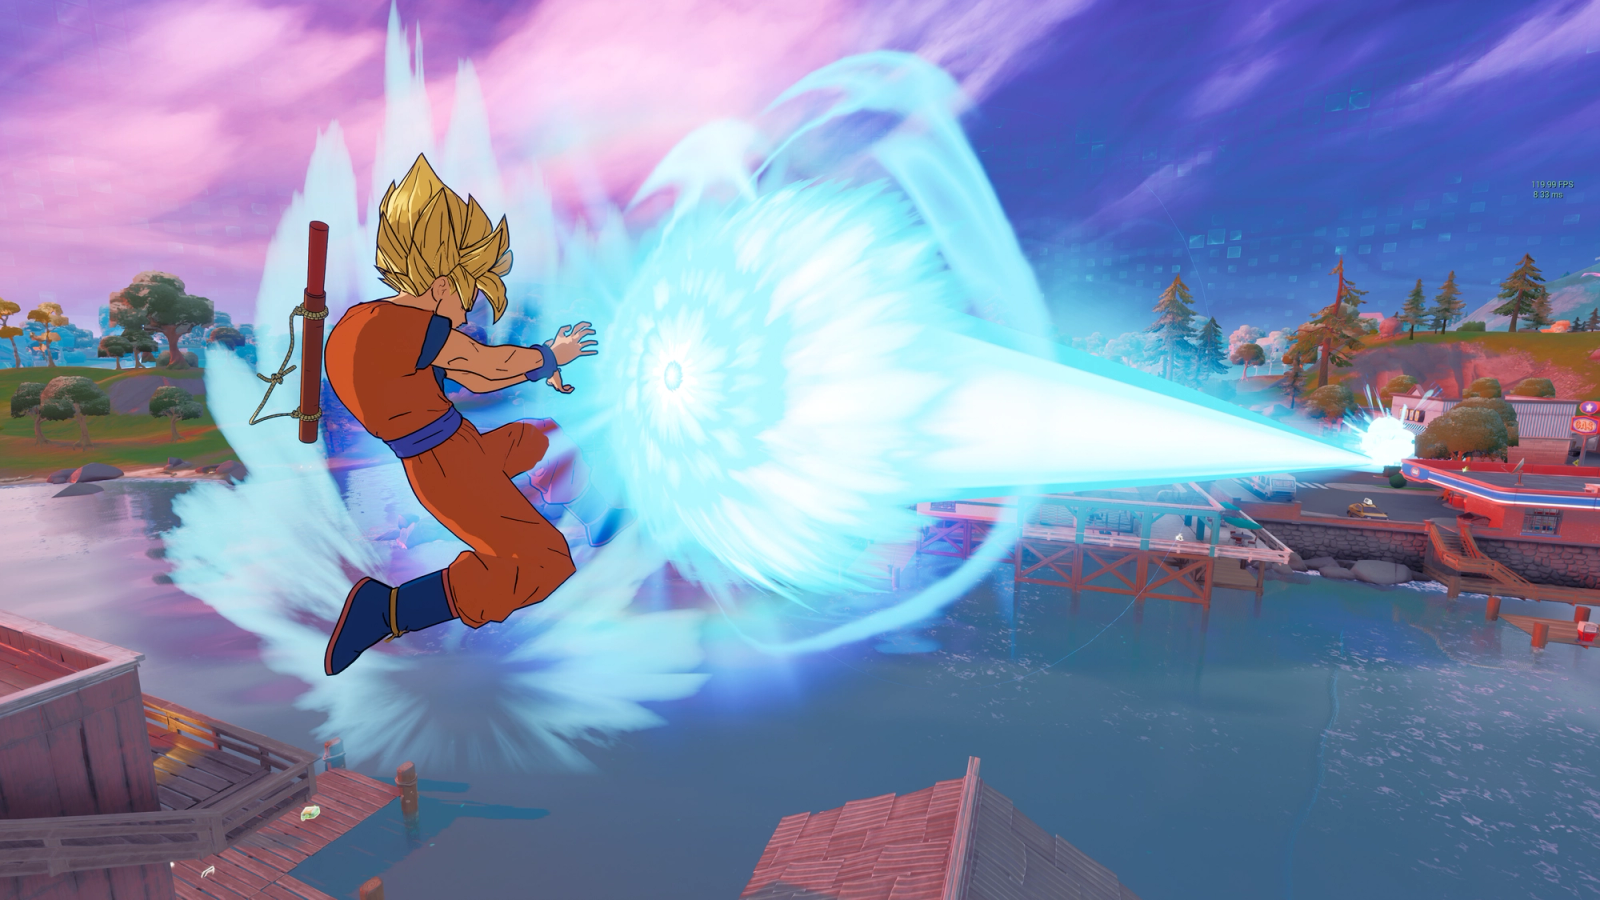 Fortnite's new Kamehameha weapon is featured in the week 11 quests.